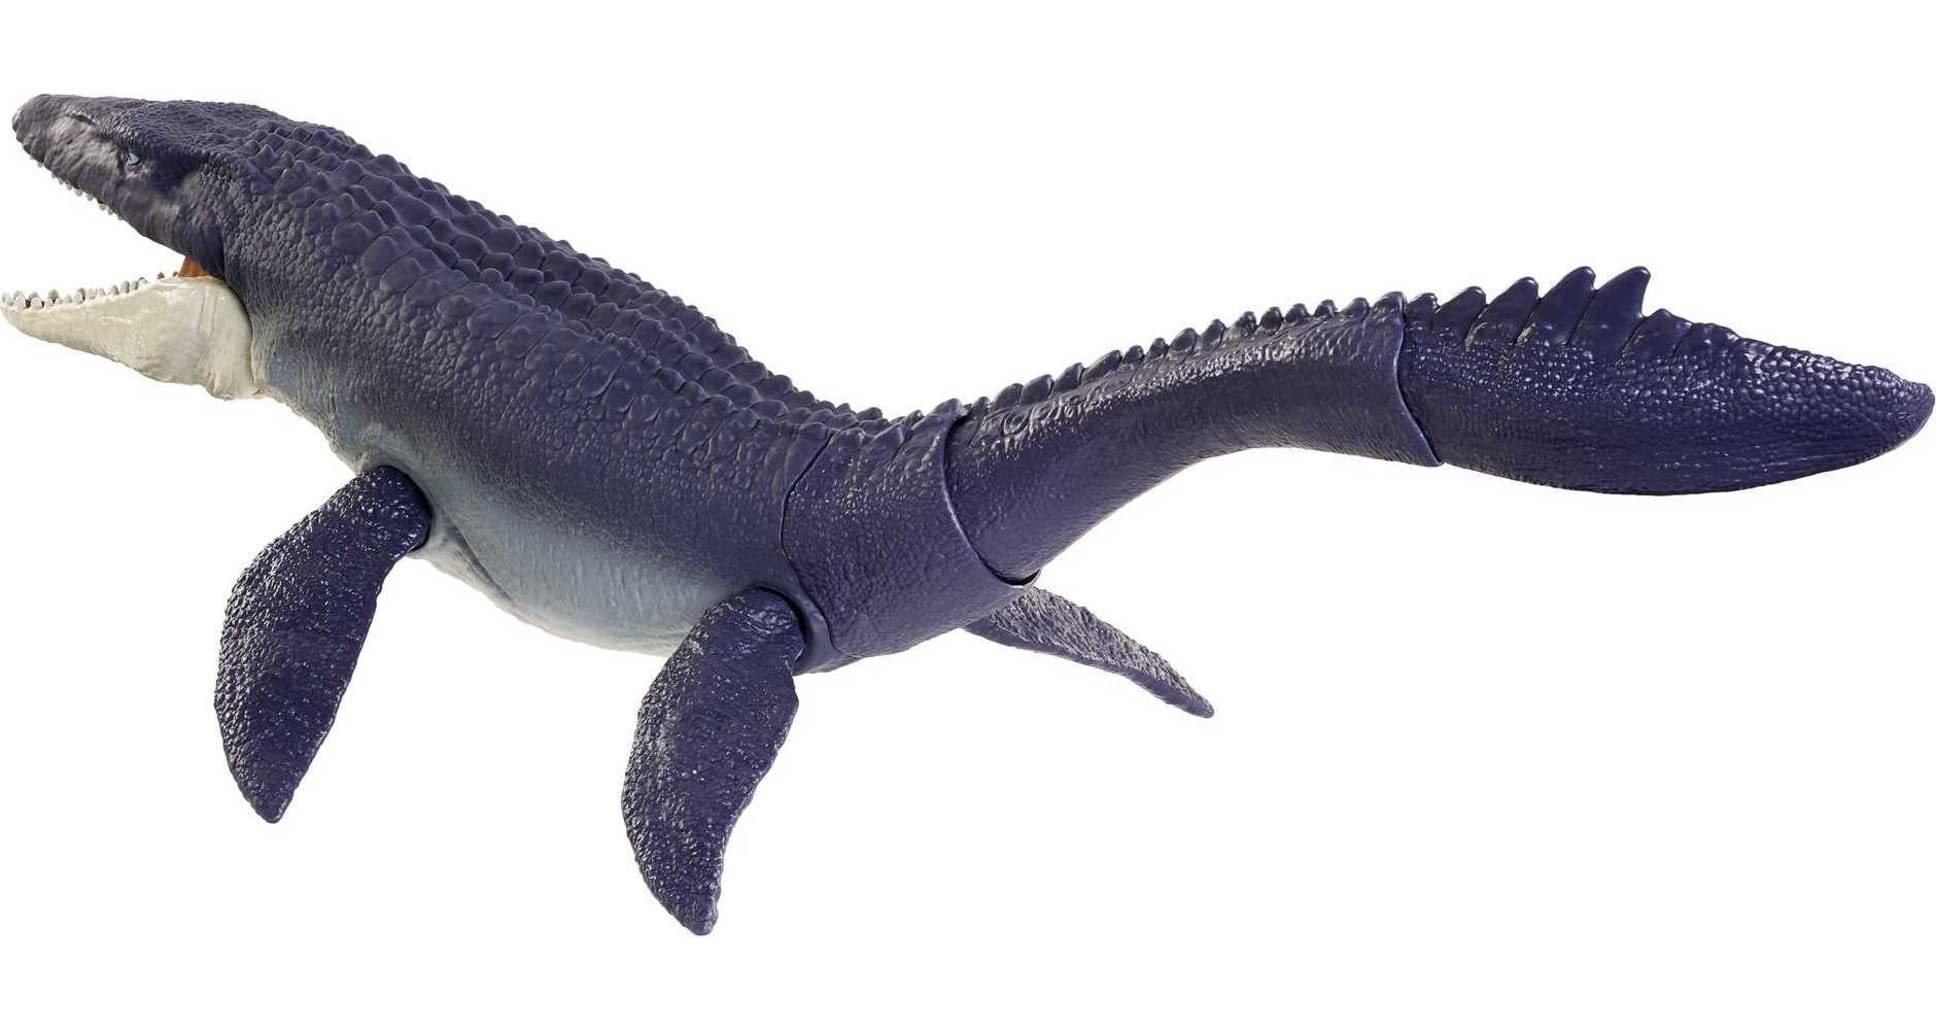 Jurassic World Toys Dominion Mosasaurus Dinosaur Action Figure, 29-in Long Toy with Movable JointsPlus Downloadable App & AR